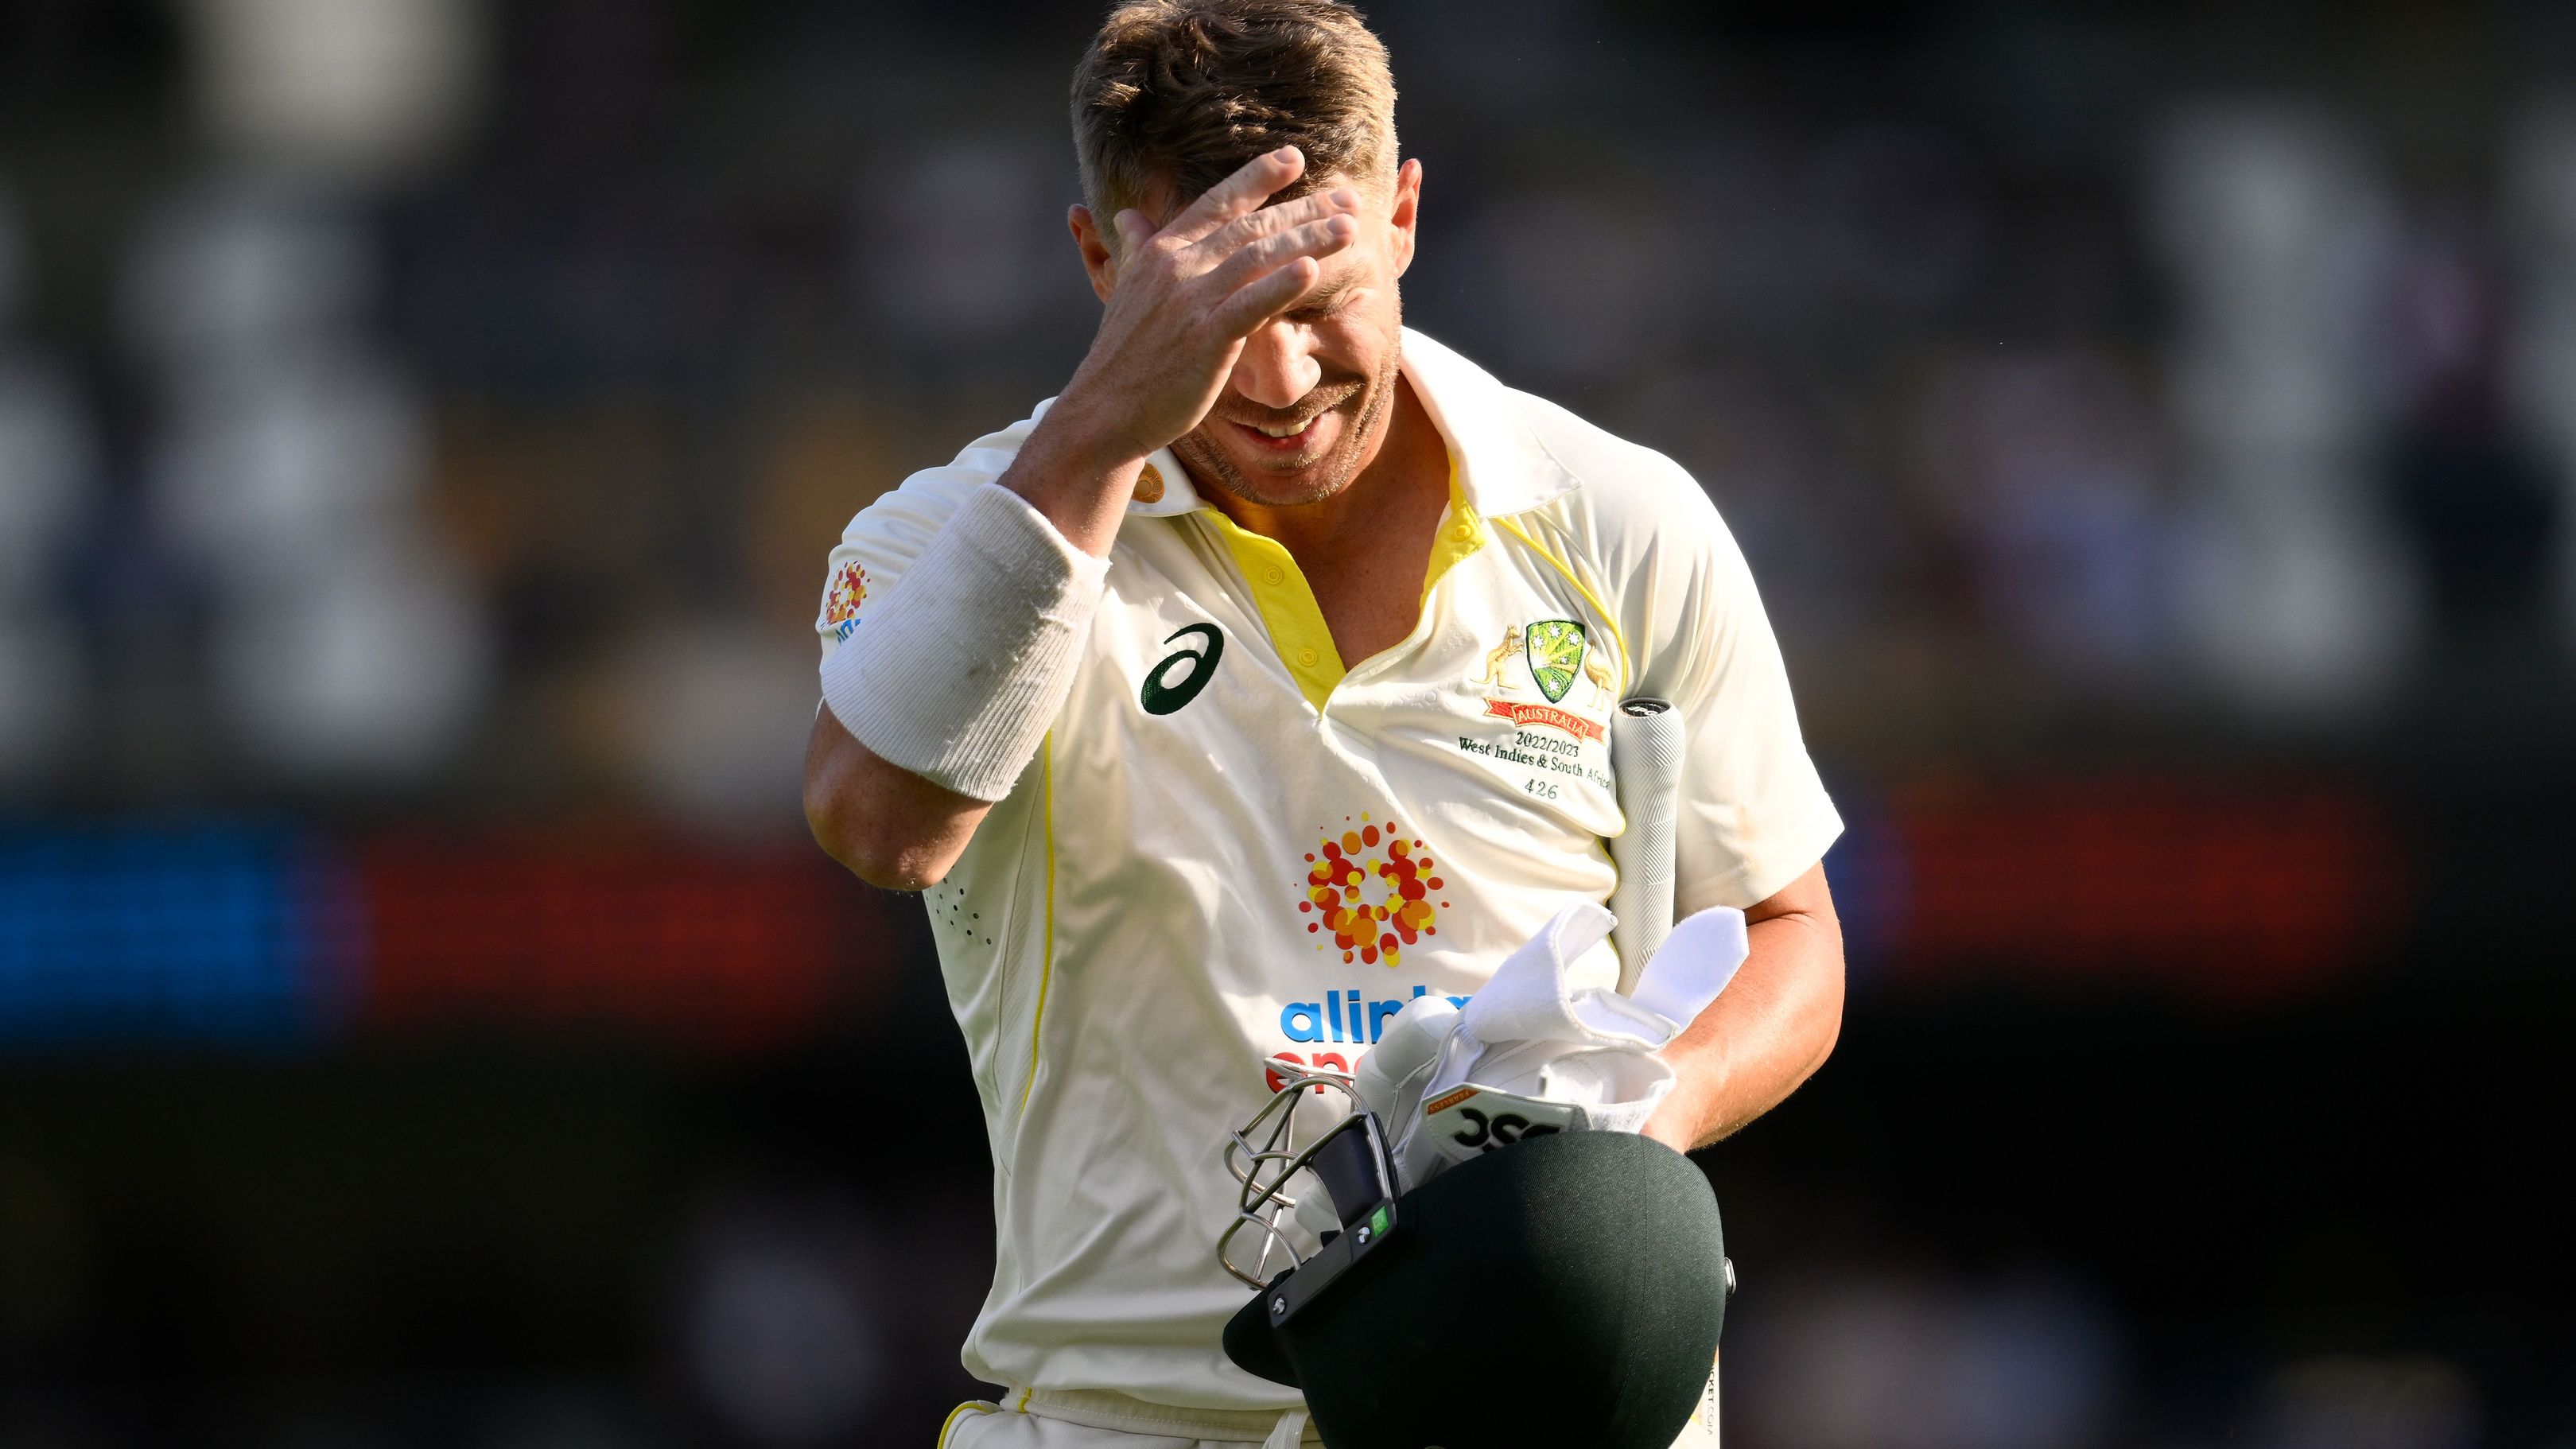 David Warner of Australia looks dejected after being dismissed by Kagiso Rabada of South Africa. (Photo by Matt Roberts - CA/Cricket Australia via Getty Images)